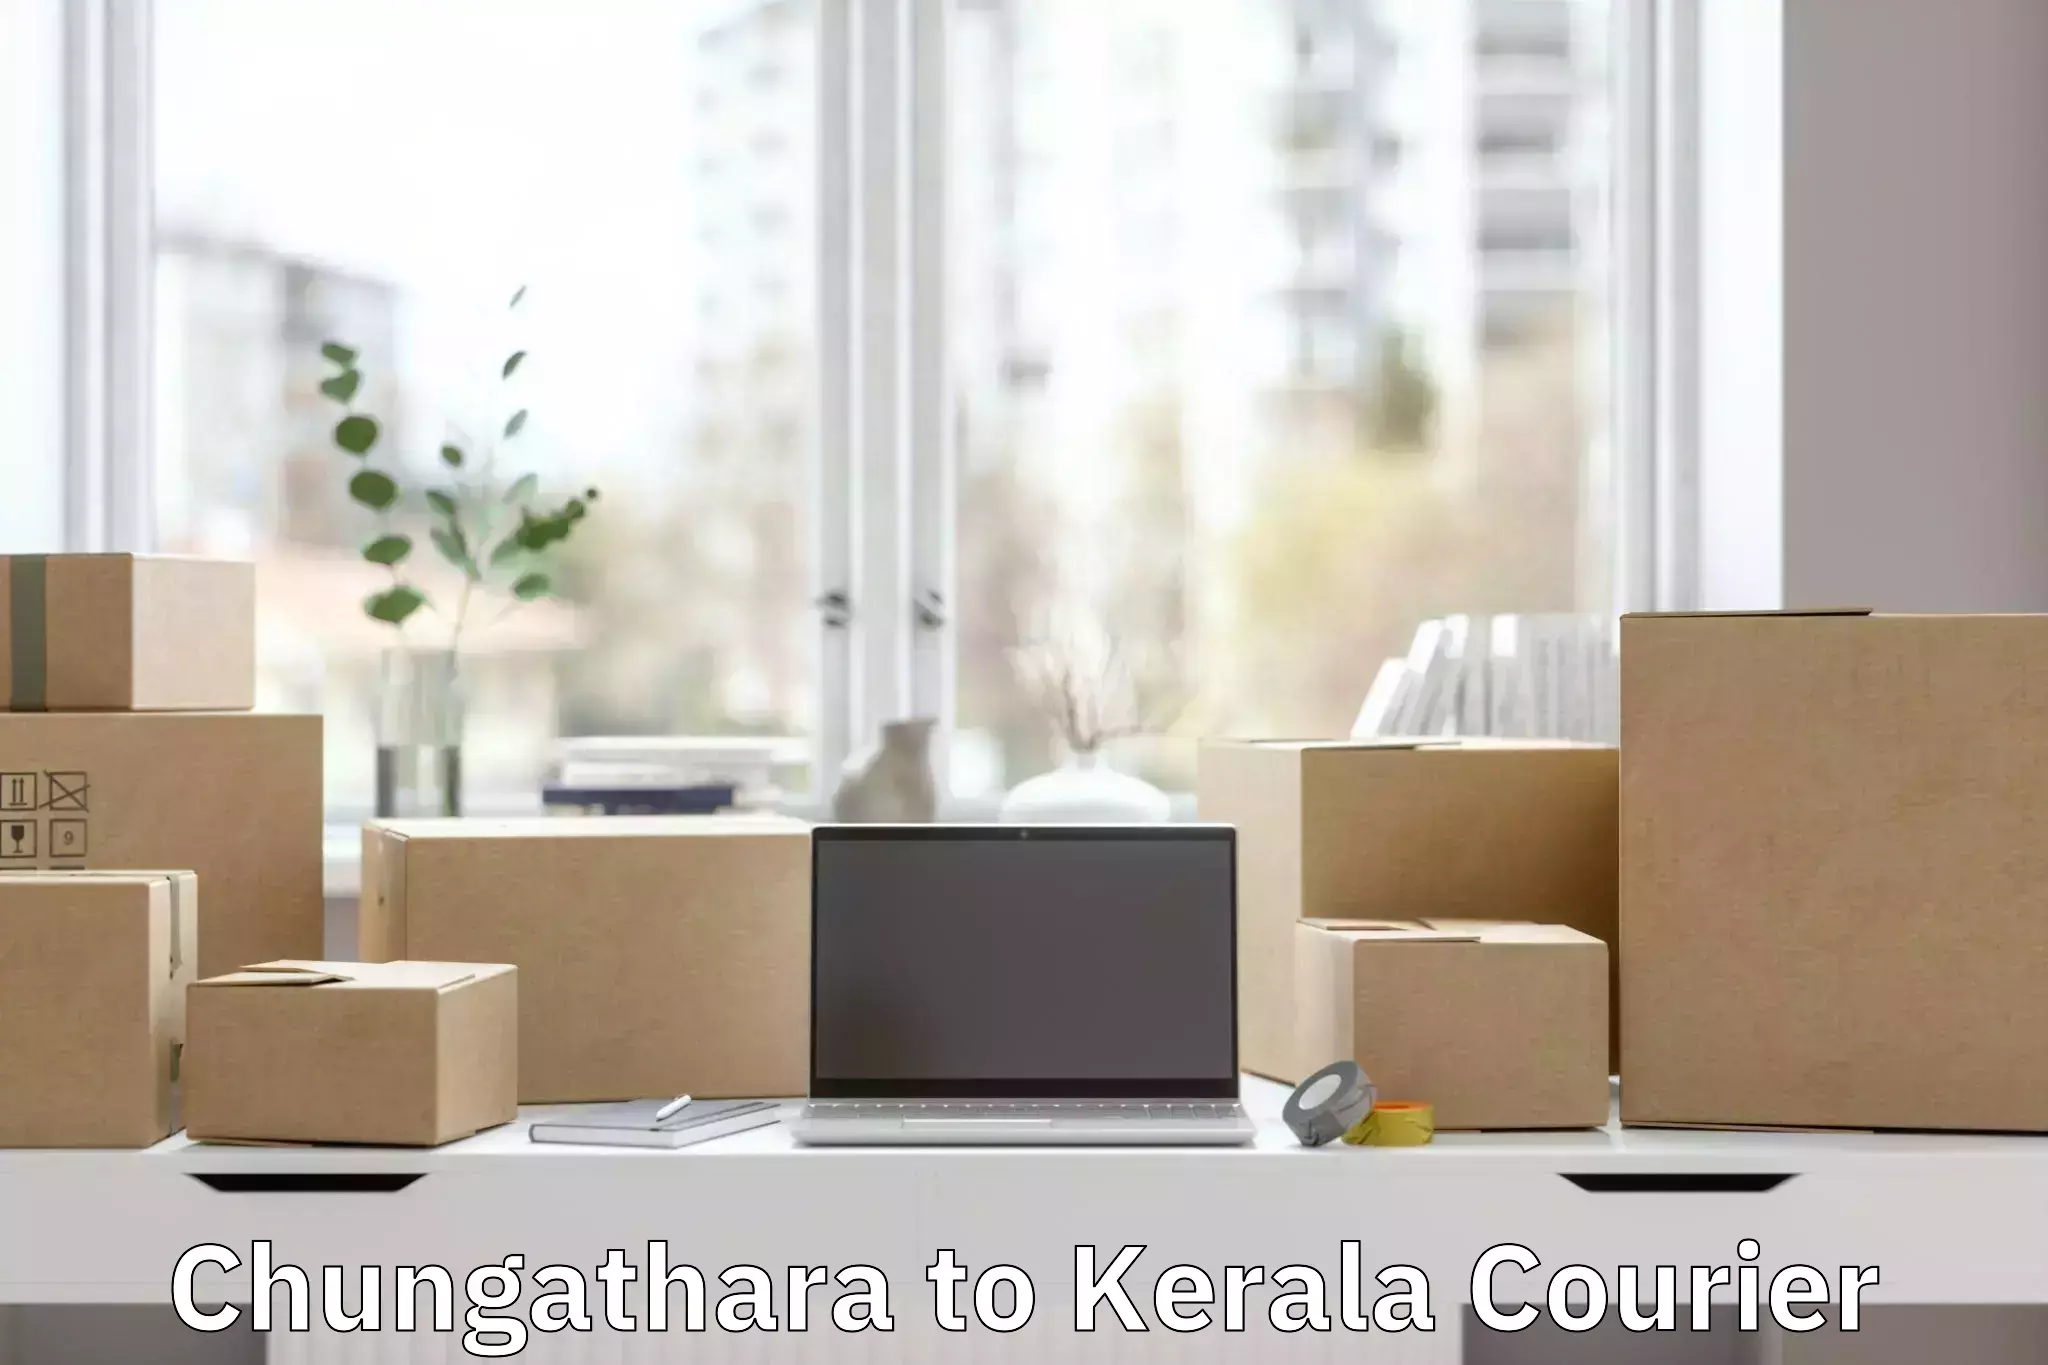 Professional baggage delivery in Chungathara to Kerala